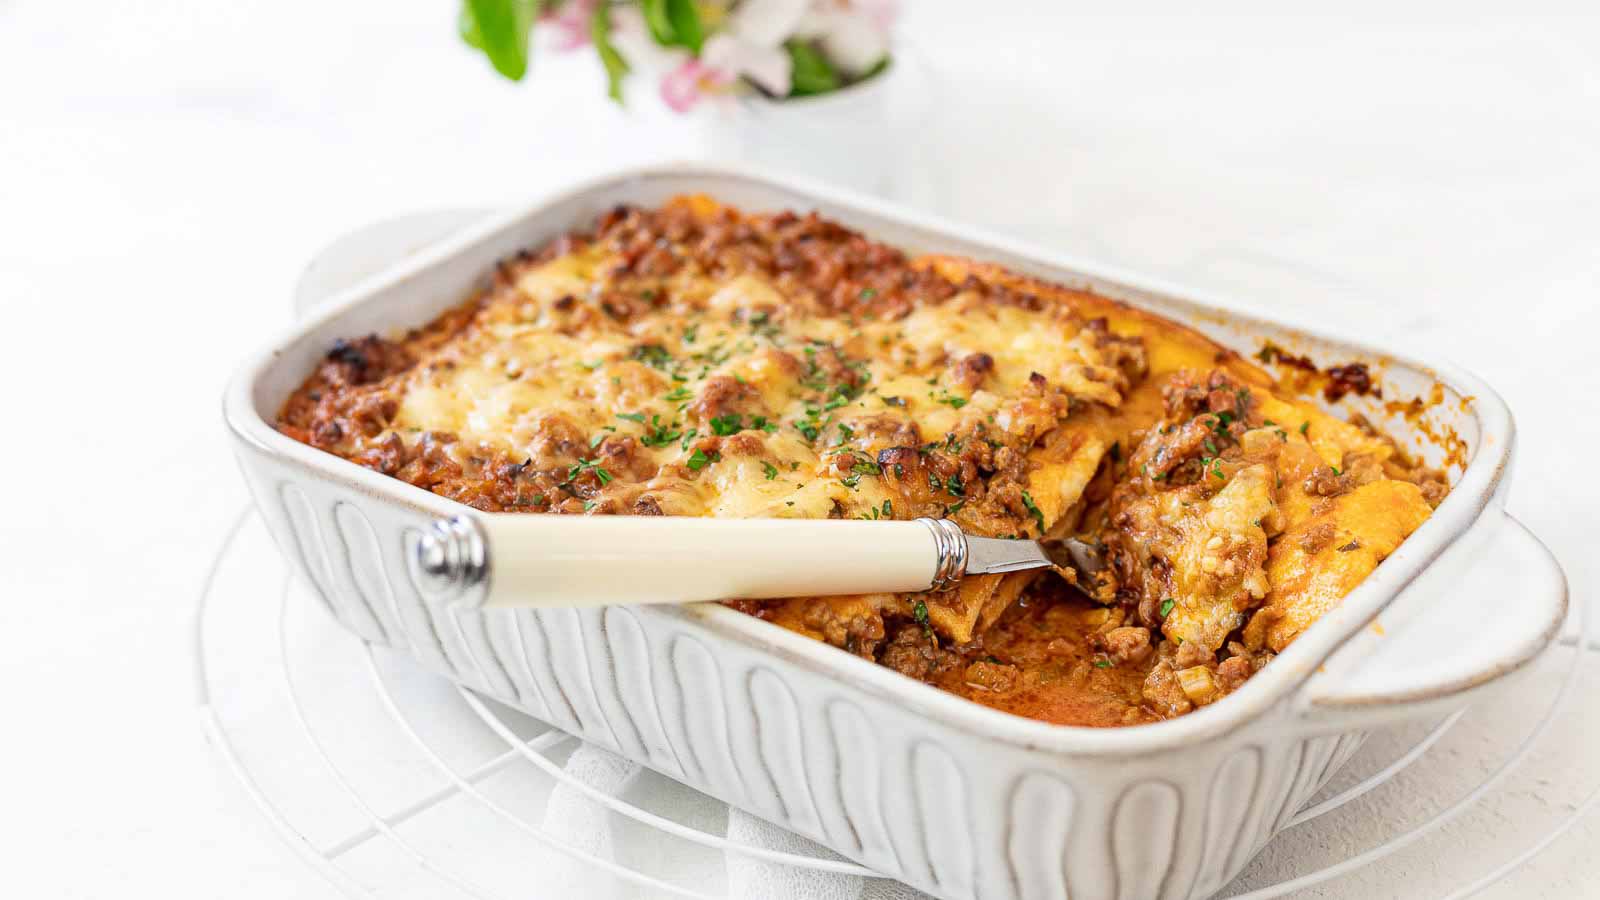 <p>Dive into the satisfying flavors of Hearty Lasagna with Ground Beef, a classic Italian dish that combines layers of lasagna noodles, rich meat sauce, and creamy cheese. This lasagna promises a symphony of flavors and a comforting meal. Whether you’re a lasagna enthusiast or seeking a hearty dinner, this recipe hits the spot.<br><strong>Get the Recipe: </strong><a href="https://www.lowcarb-nocarb.com/low-carb-lasagna/?utm_source=msn&utm_medium=page&utm_campaign=Your%20title%20here:%20it%20should%20be%2055-60%20characters,%20ideally">Hearty Lasagna with Ground Beef</a></p>